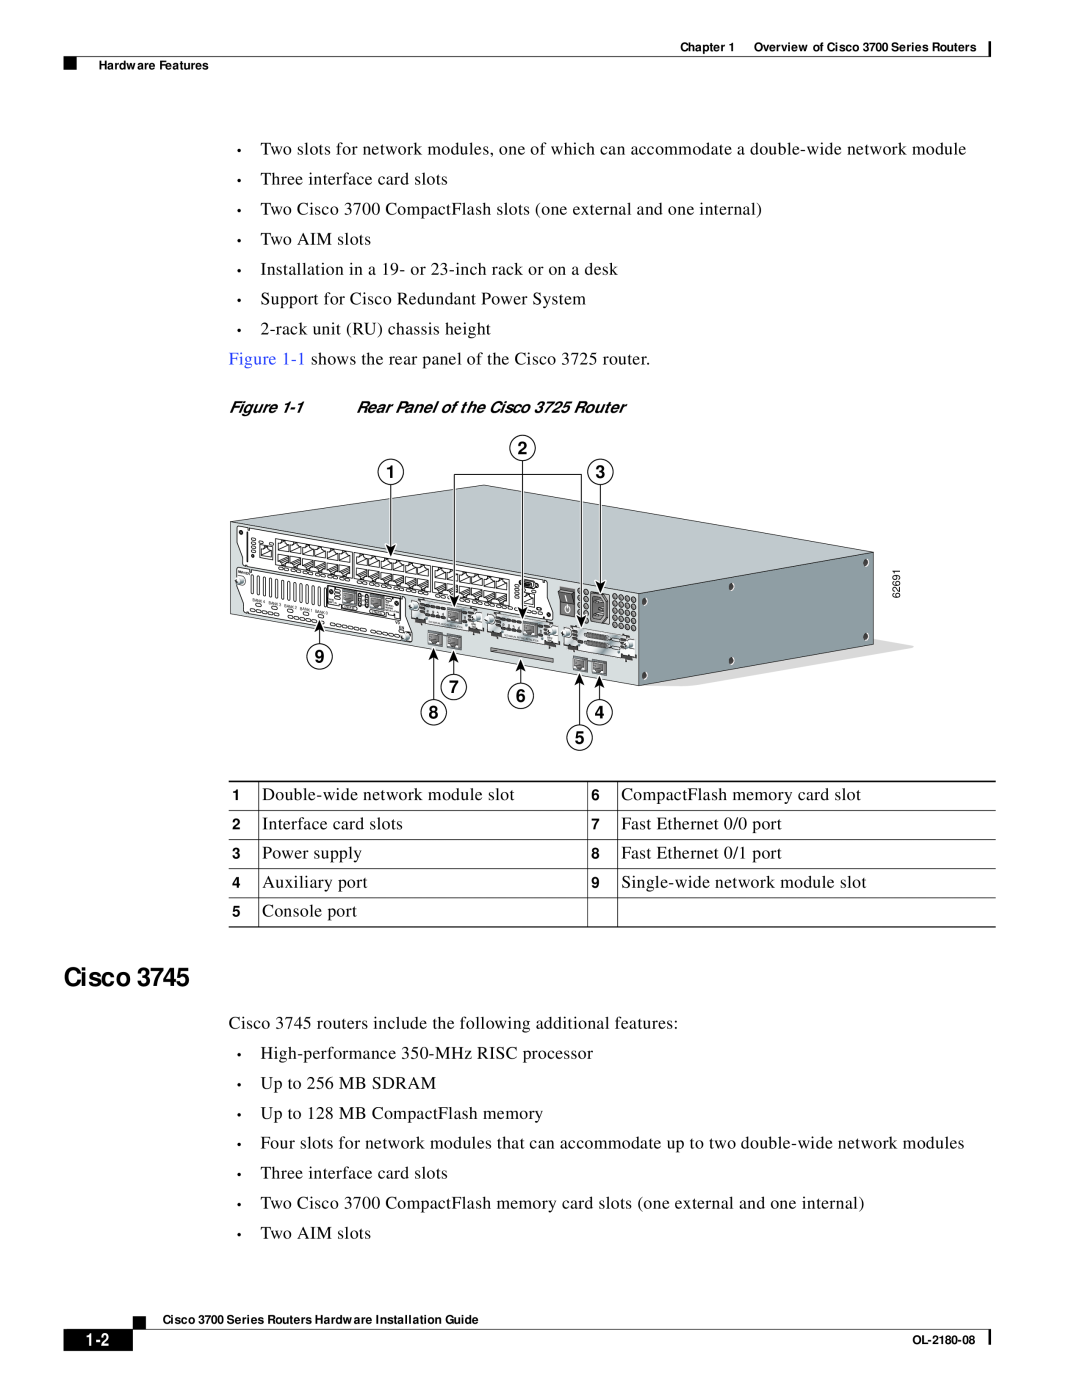 Cisco Systems 3700 specifications Rear Panel of the Cisco 3725 Router, OL-2180-08 